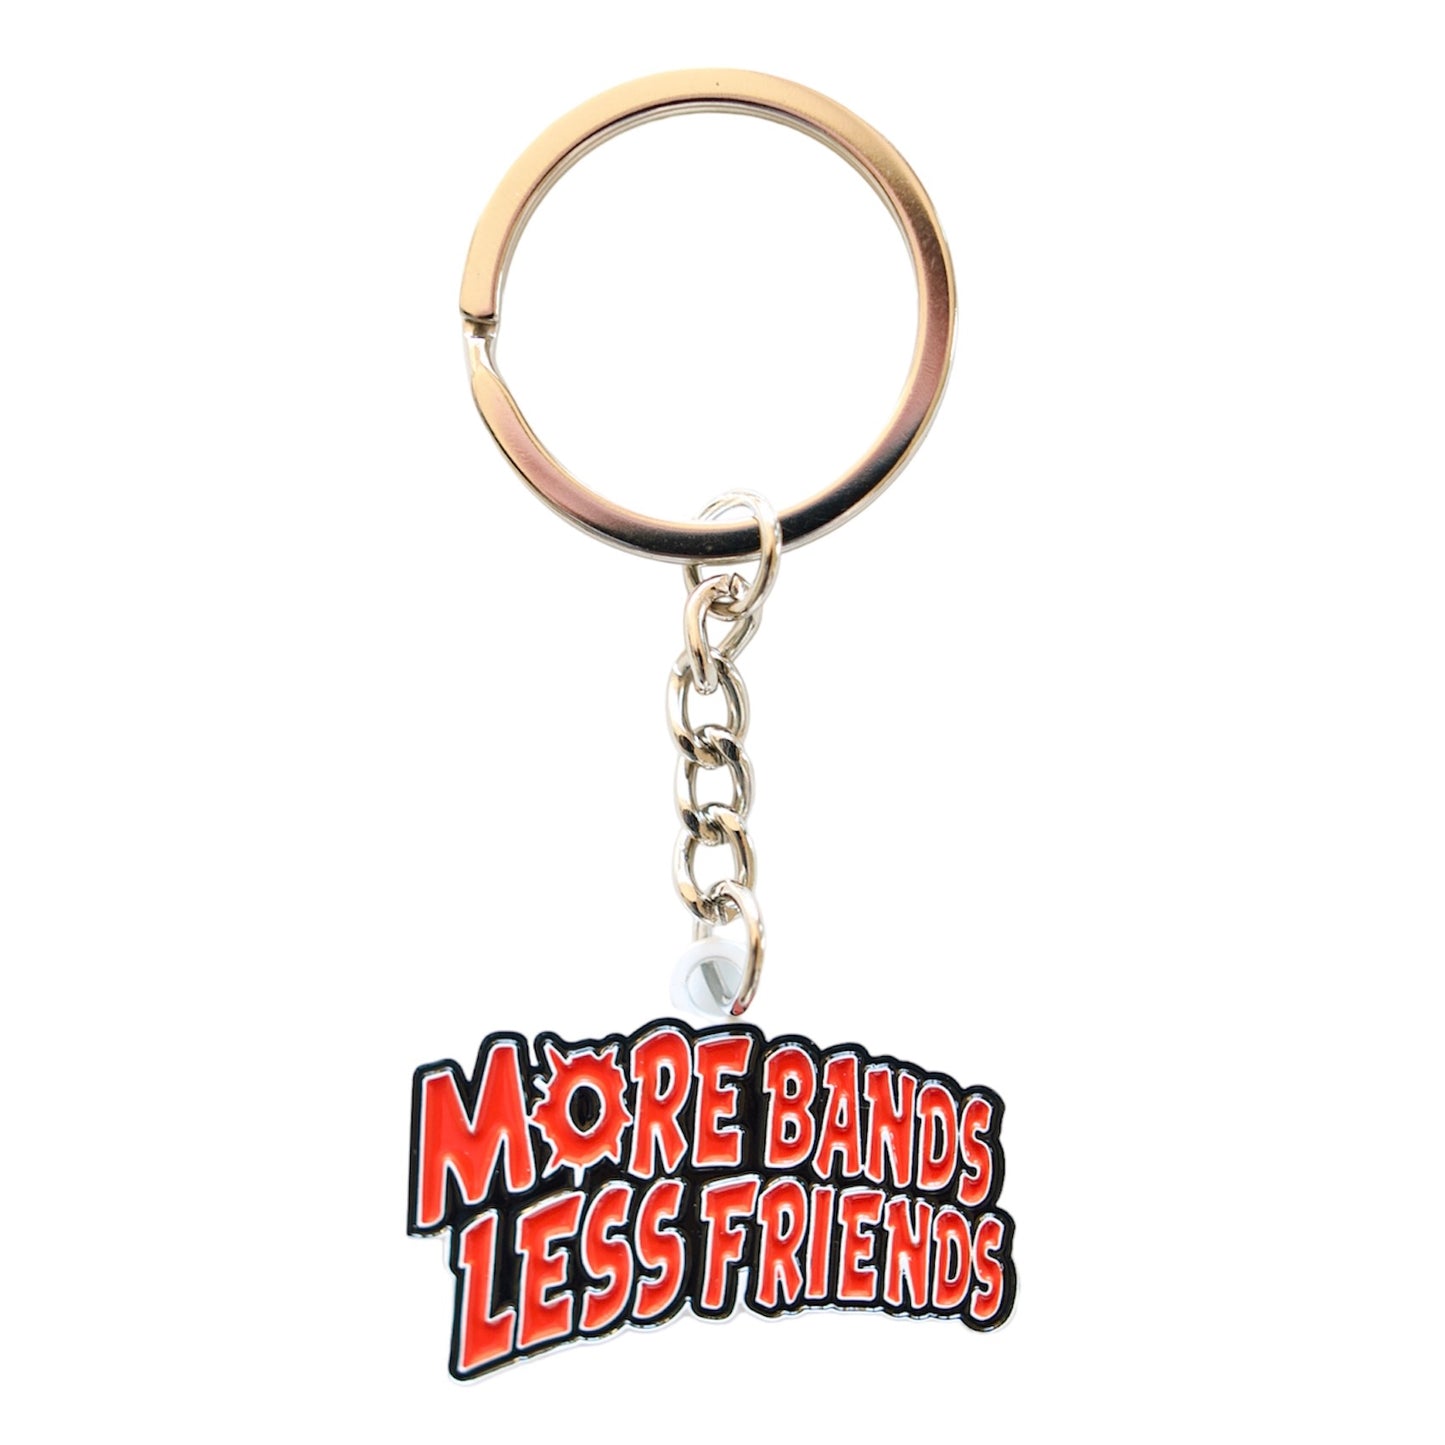 “More Bands Less Friends” Keychain